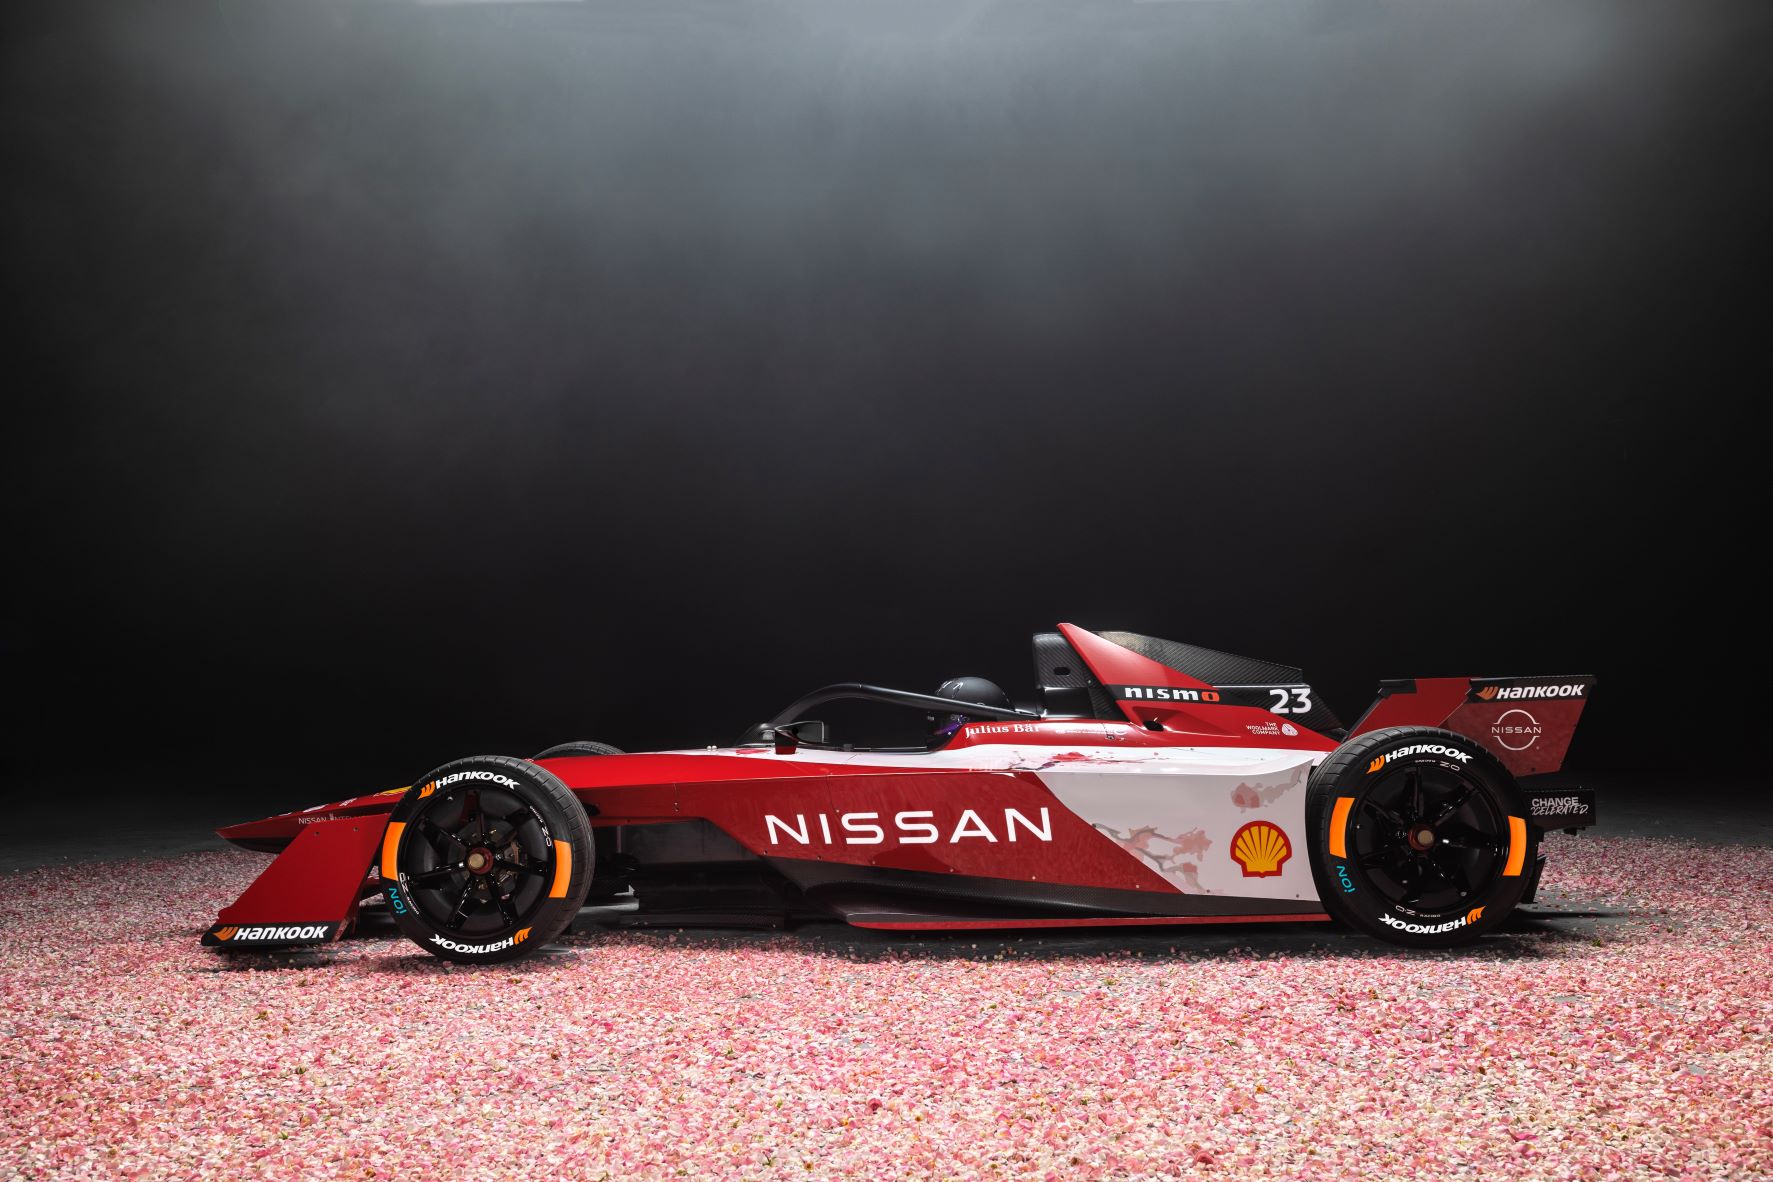 Side view of Team Nissan's Formula E Gen 3 racecar in red and white.